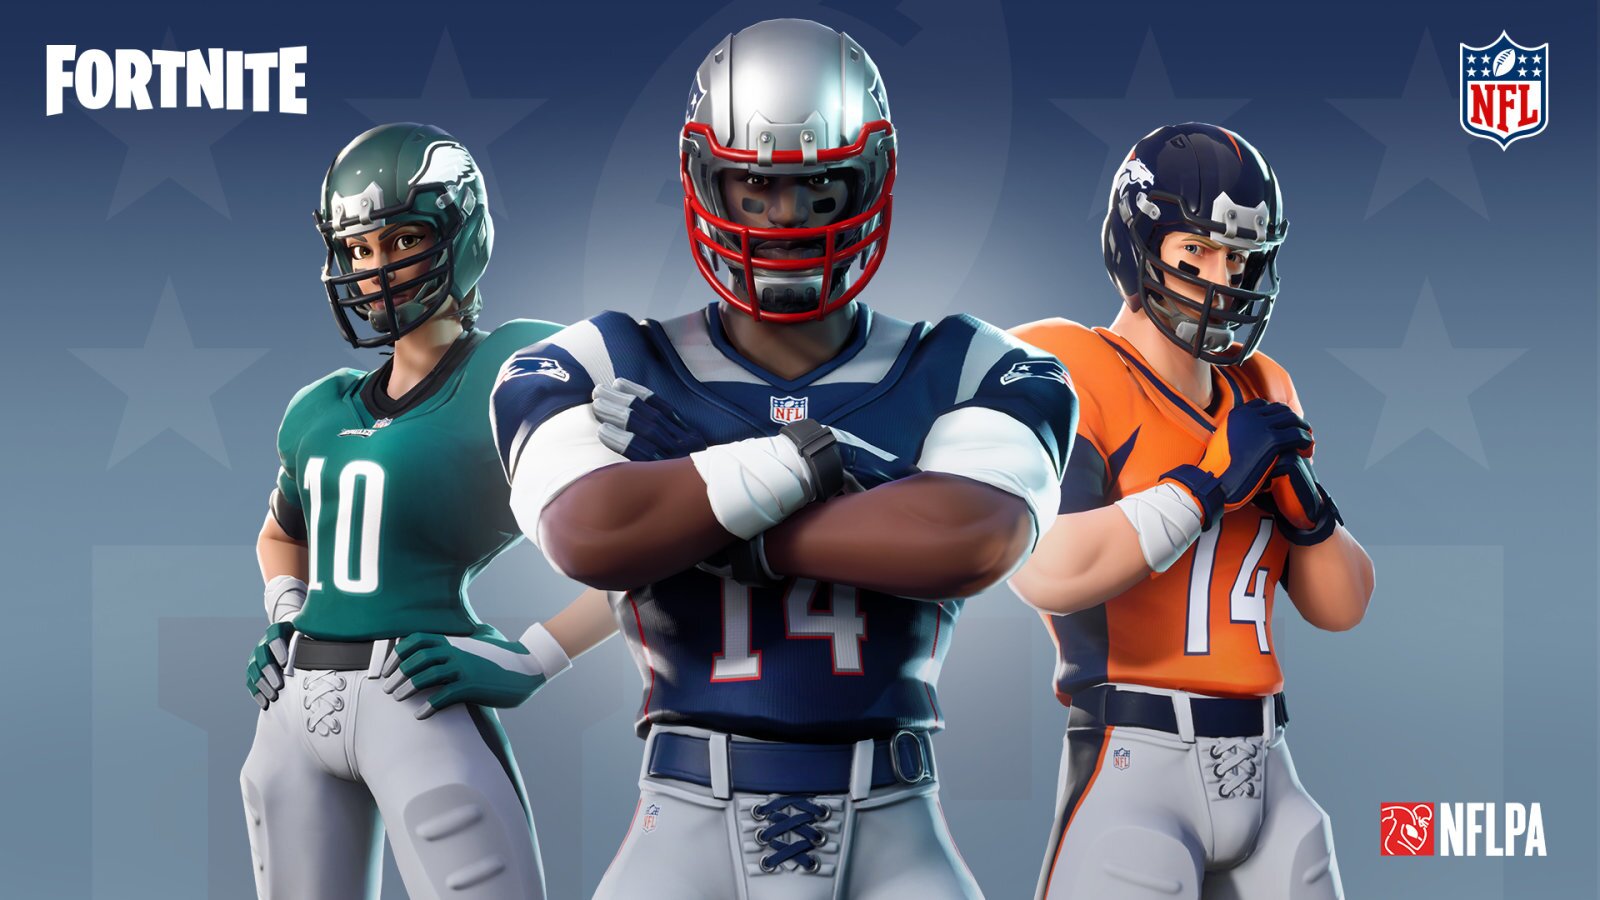 There will be three female and three male skins for each NFL team.